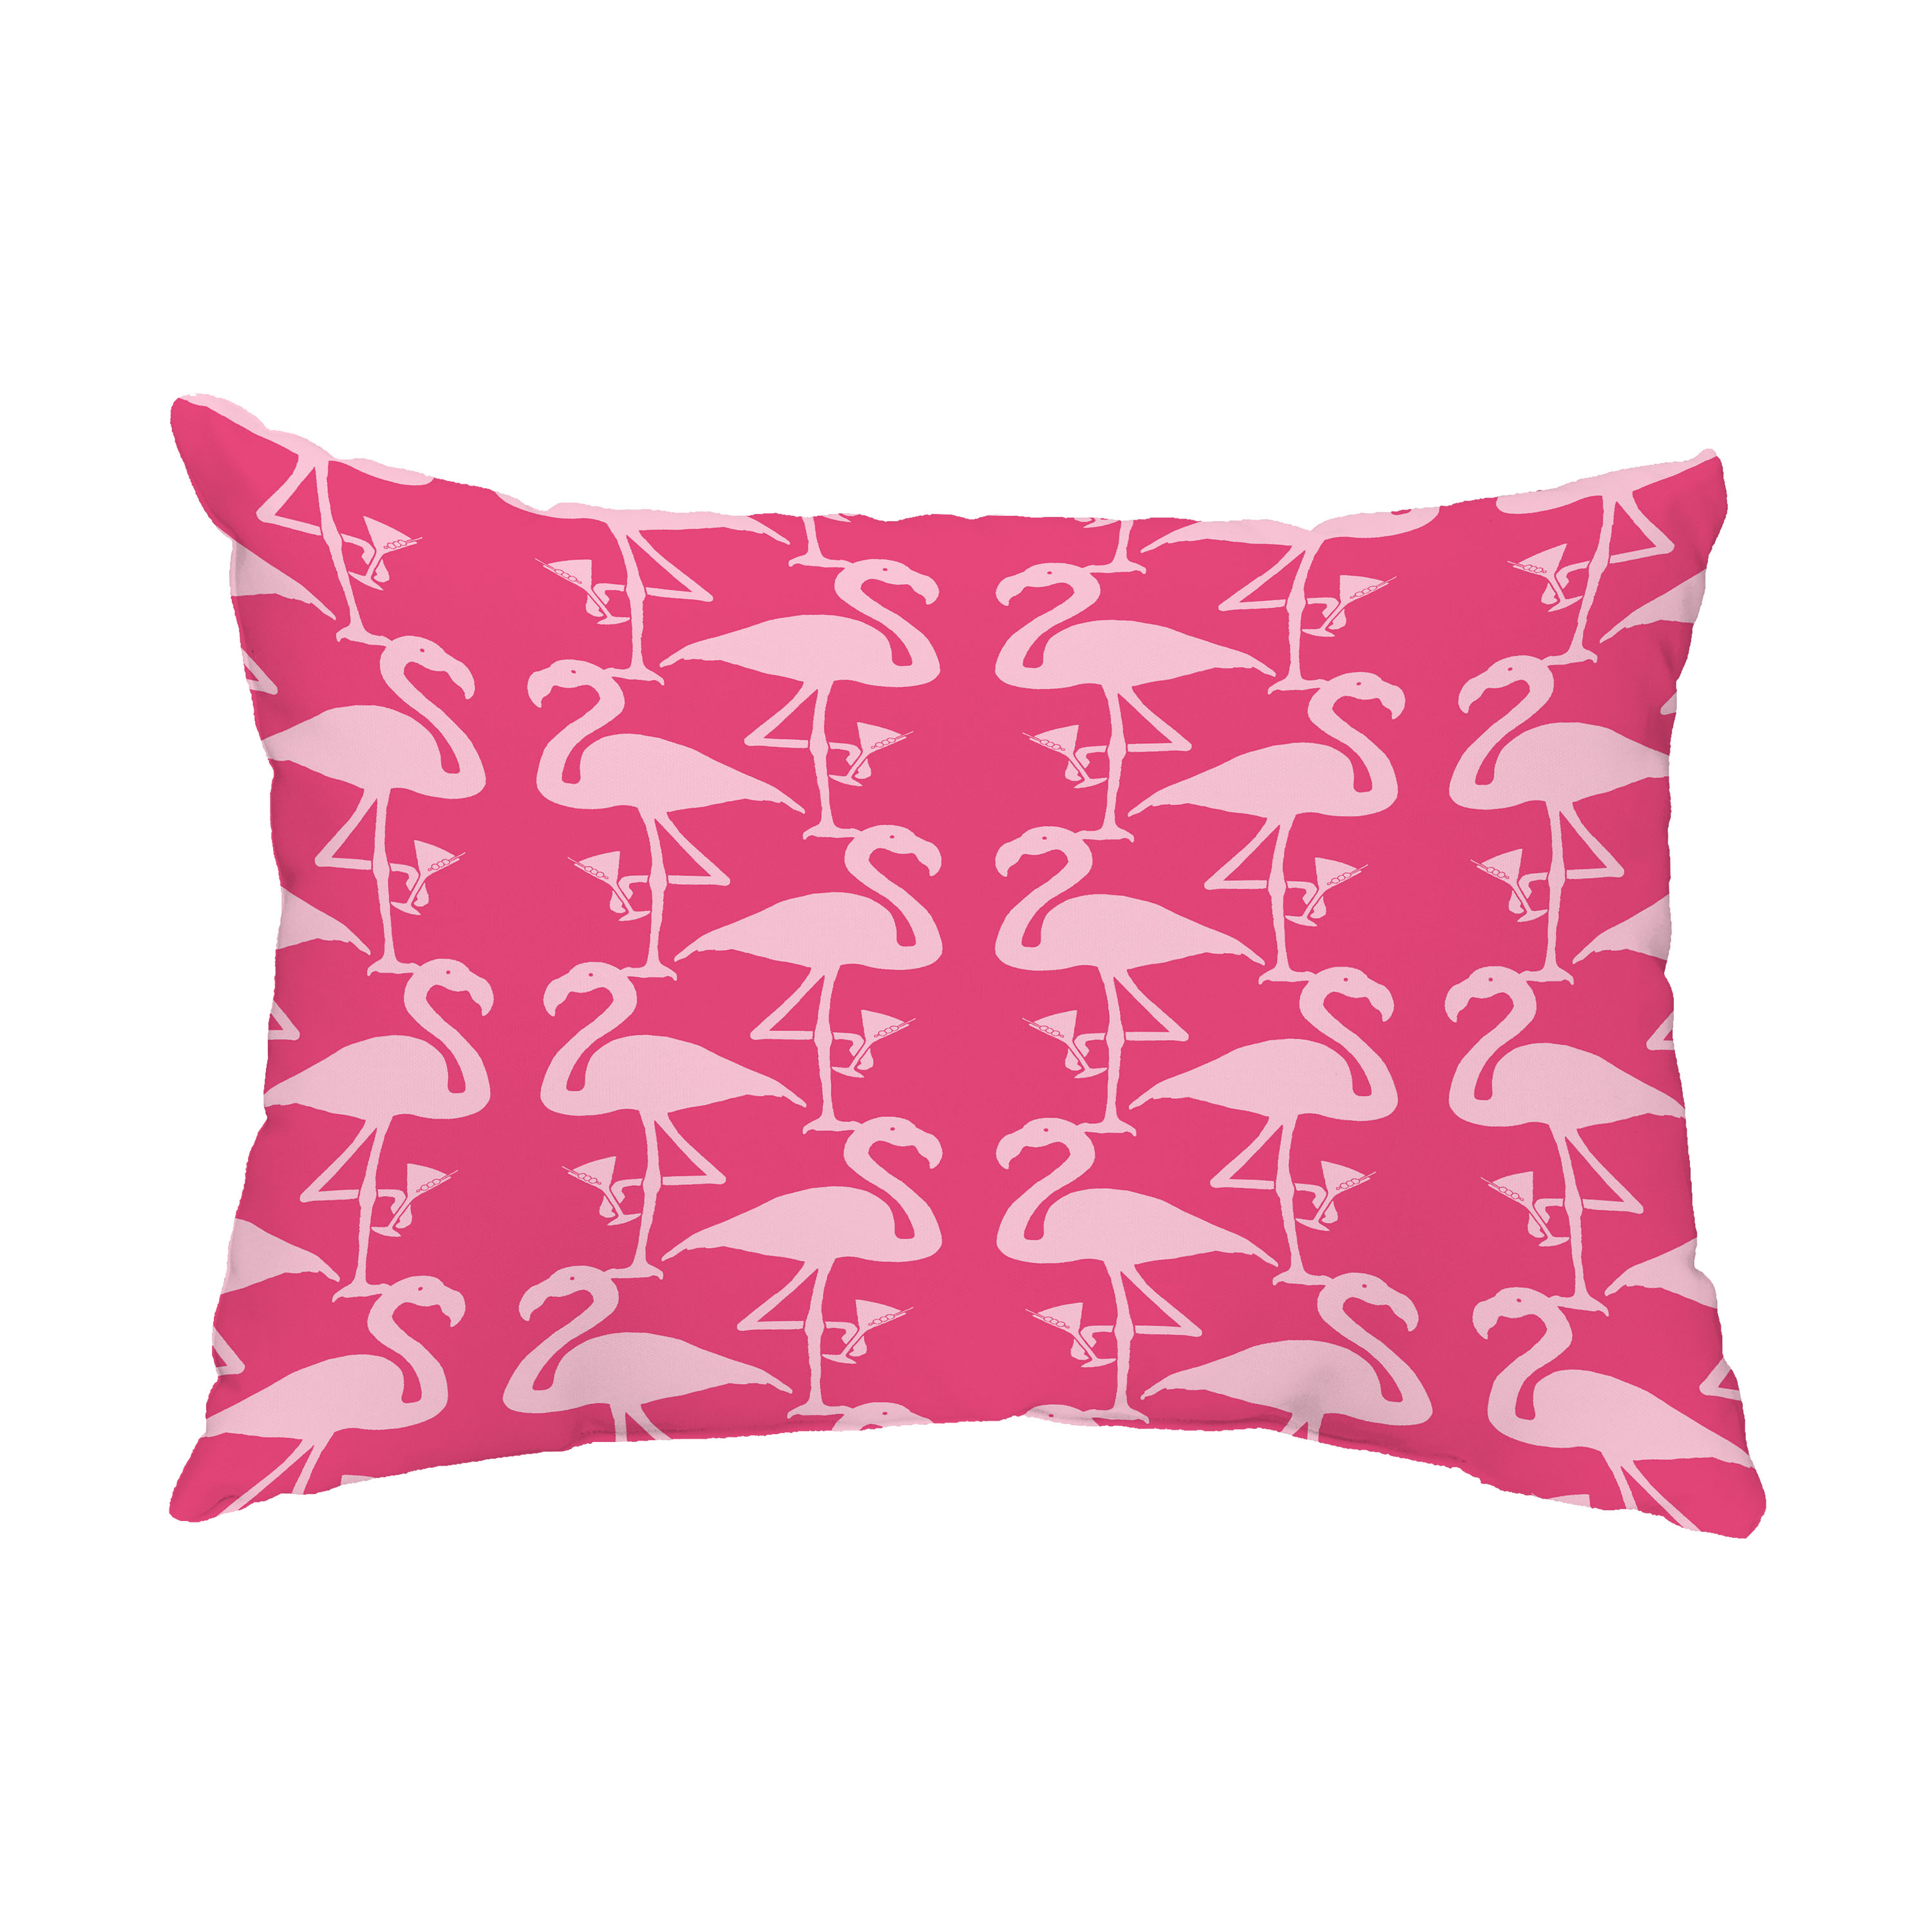 Simply Daisy, 14" x 20" Flamingo Heart Martini Pink Abstract Decorative Outdoor Pillow - image 1 of 1